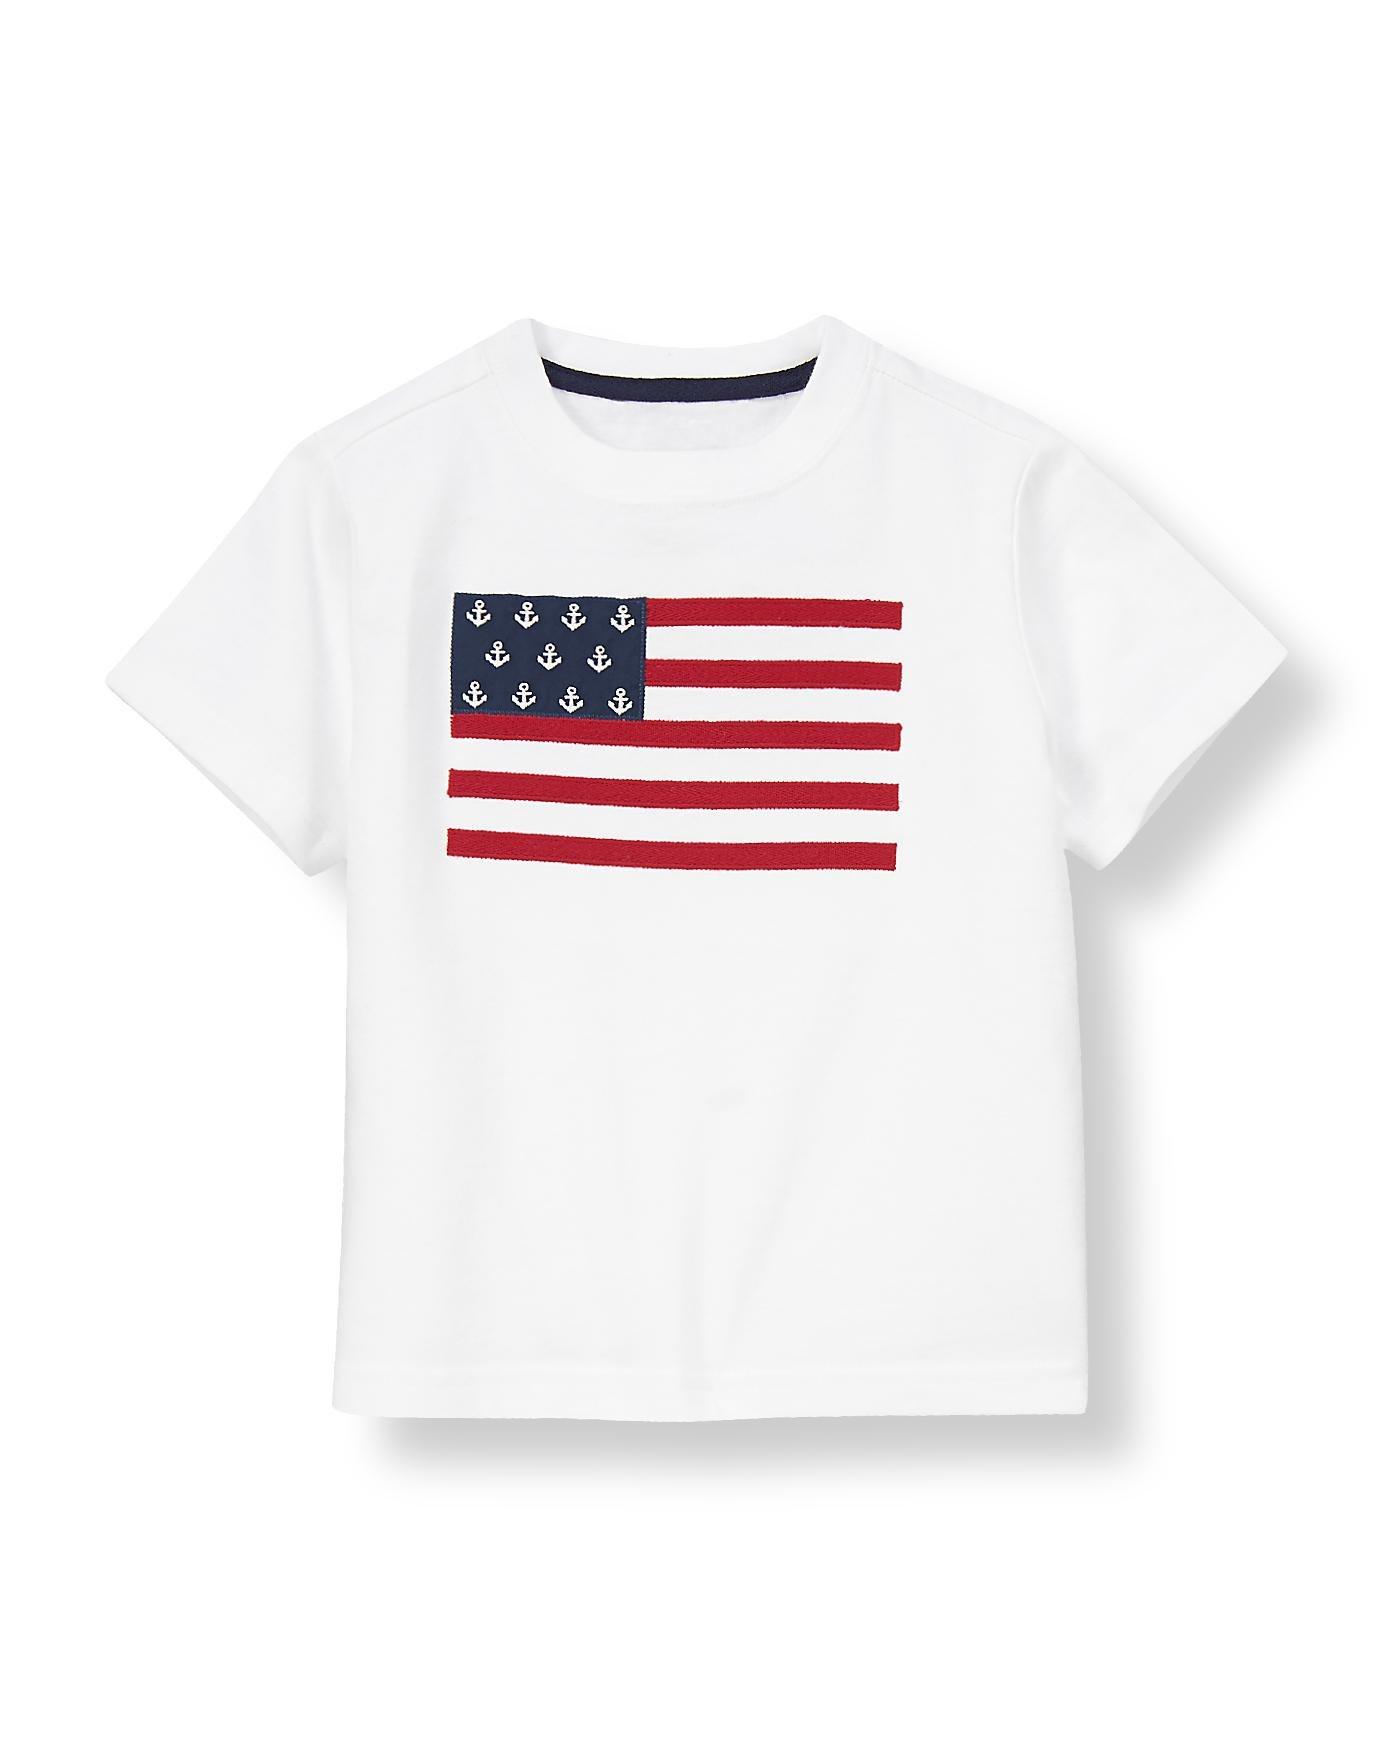 Anchor Flag Tee image number 0